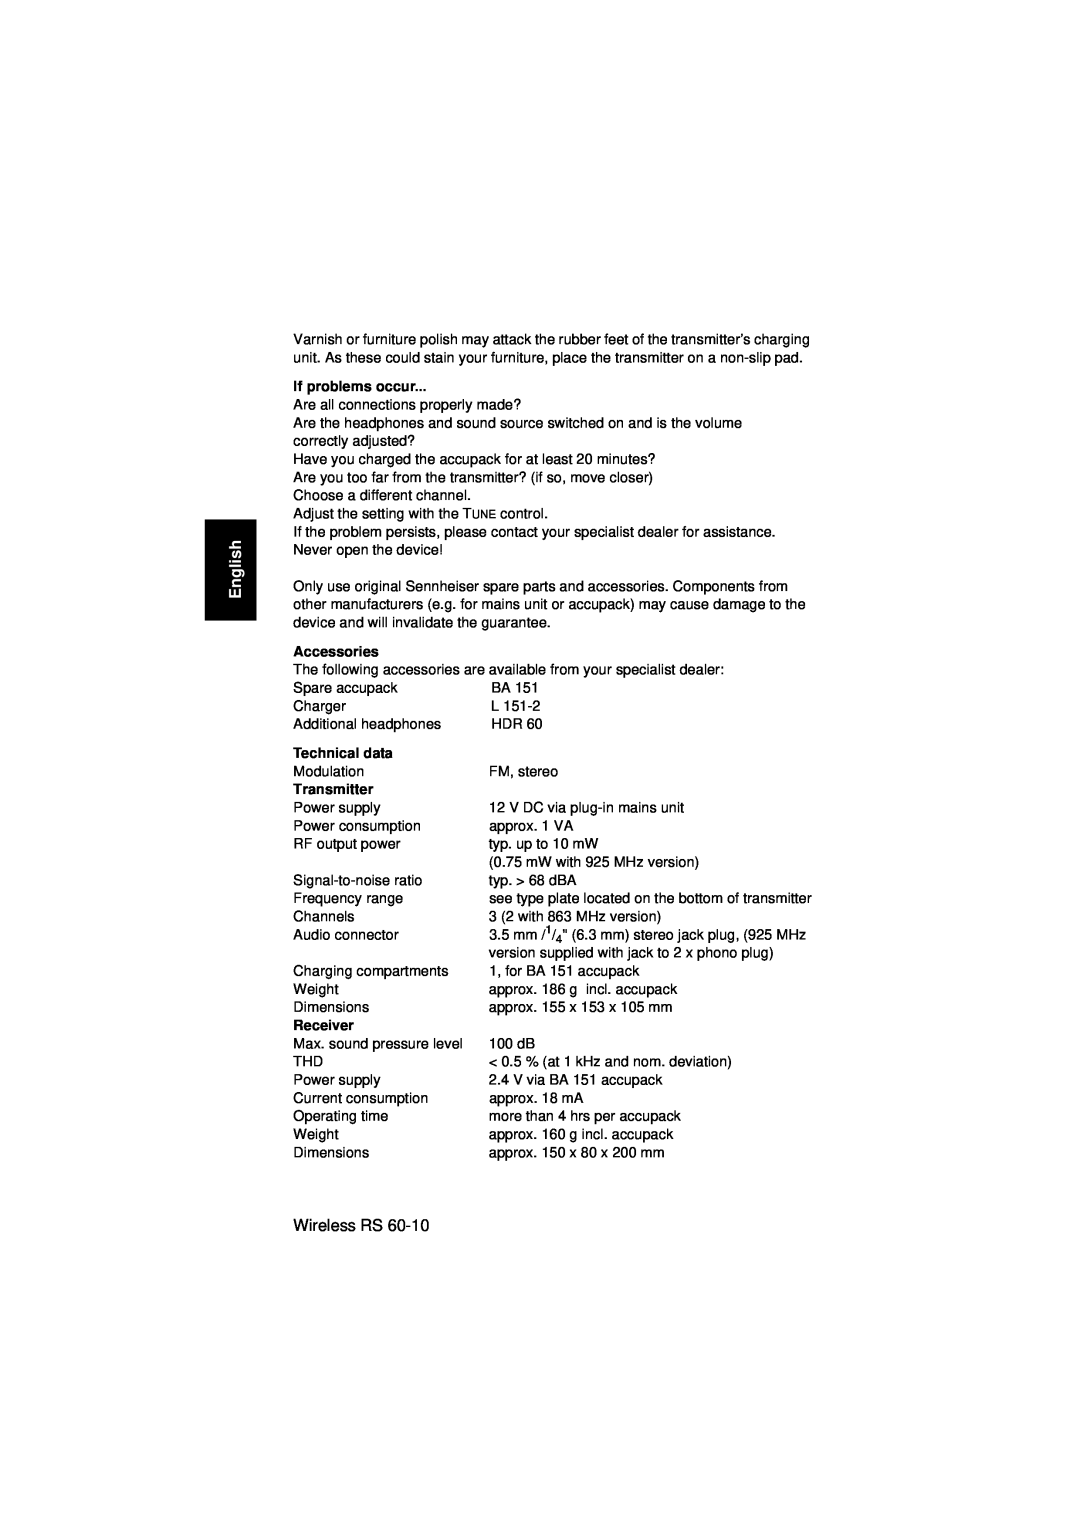 Sennheiser Wireless RS 60 instruction manual English, If problems occur, Accessories, Technical data, Transmitter, Receiver 